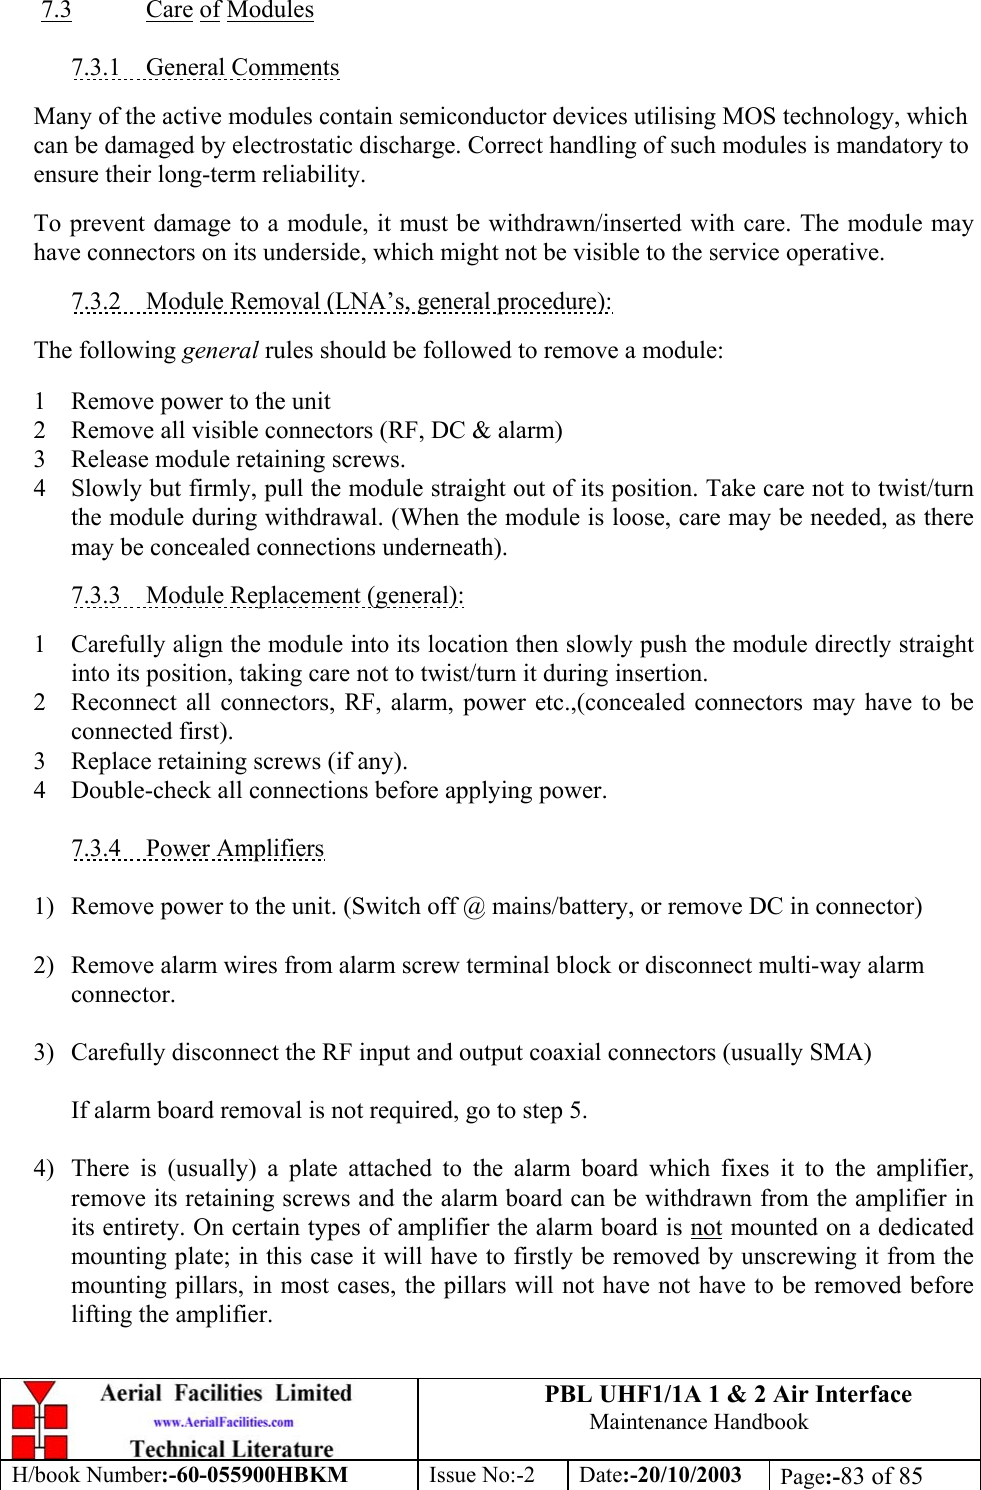 PBL UHF1/1A 1 &amp; 2 Air InterfaceMaintenance HandbookH/book Number:-60-055900HBKM Issue No:-2 Date:-20/10/2003 Page:-83 of 857.3 Care of Modules7.3.1    General CommentsMany of the active modules contain semiconductor devices utilising MOS technology, whichcan be damaged by electrostatic discharge. Correct handling of such modules is mandatory toensure their long-term reliability.To prevent damage to a module, it must be withdrawn/inserted with care. The module mayhave connectors on its underside, which might not be visible to the service operative.7.3.2    Module Removal (LNA’s, general procedure):The following general rules should be followed to remove a module:1 Remove power to the unit2 Remove all visible connectors (RF, DC &amp; alarm)3 Release module retaining screws.4 Slowly but firmly, pull the module straight out of its position. Take care not to twist/turnthe module during withdrawal. (When the module is loose, care may be needed, as theremay be concealed connections underneath).7.3.3    Module Replacement (general):1 Carefully align the module into its location then slowly push the module directly straightinto its position, taking care not to twist/turn it during insertion.2 Reconnect all connectors, RF, alarm, power etc.,(concealed connectors may have to beconnected first).3 Replace retaining screws (if any).4 Double-check all connections before applying power.7.3.4    Power Amplifiers1) Remove power to the unit. (Switch off @ mains/battery, or remove DC in connector)2) Remove alarm wires from alarm screw terminal block or disconnect multi-way alarmconnector.3) Carefully disconnect the RF input and output coaxial connectors (usually SMA)If alarm board removal is not required, go to step 5.4) There is (usually) a plate attached to the alarm board which fixes it to the amplifier,remove its retaining screws and the alarm board can be withdrawn from the amplifier inits entirety. On certain types of amplifier the alarm board is not mounted on a dedicatedmounting plate; in this case it will have to firstly be removed by unscrewing it from themounting pillars, in most cases, the pillars will not have not have to be removed beforelifting the amplifier.